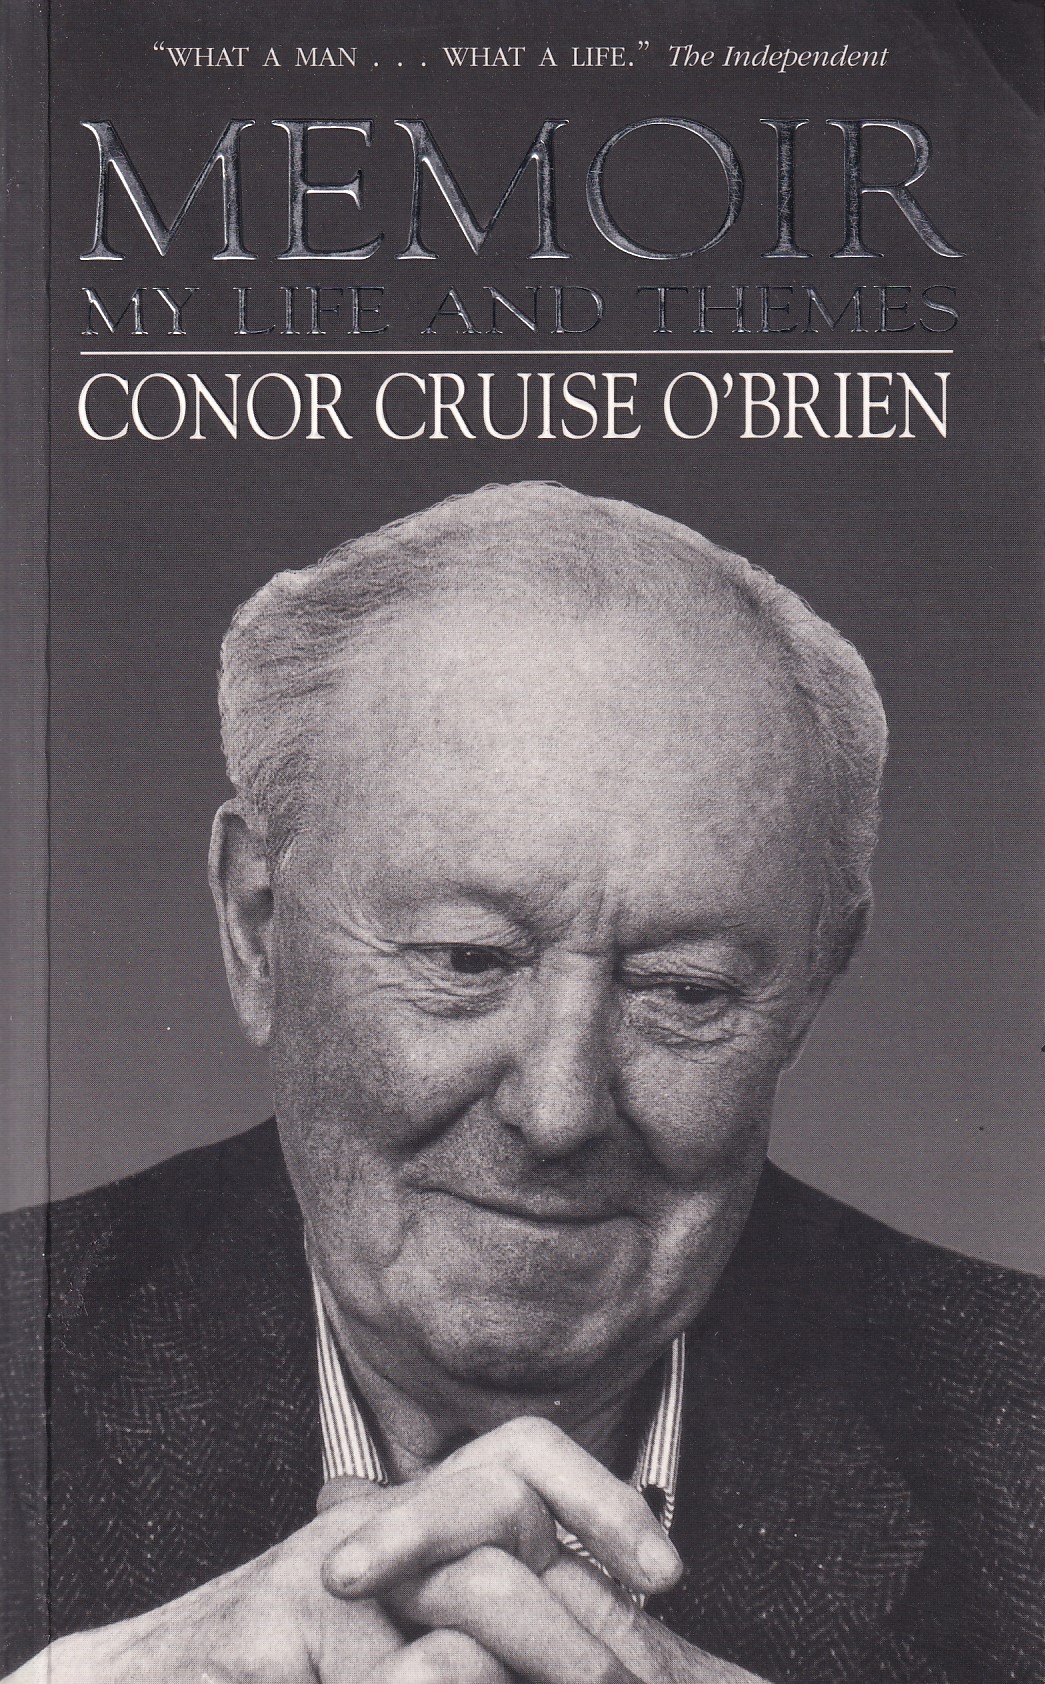 Memoir: My Life and Themes | Conor Cruise O'Brien | Charlie Byrne's